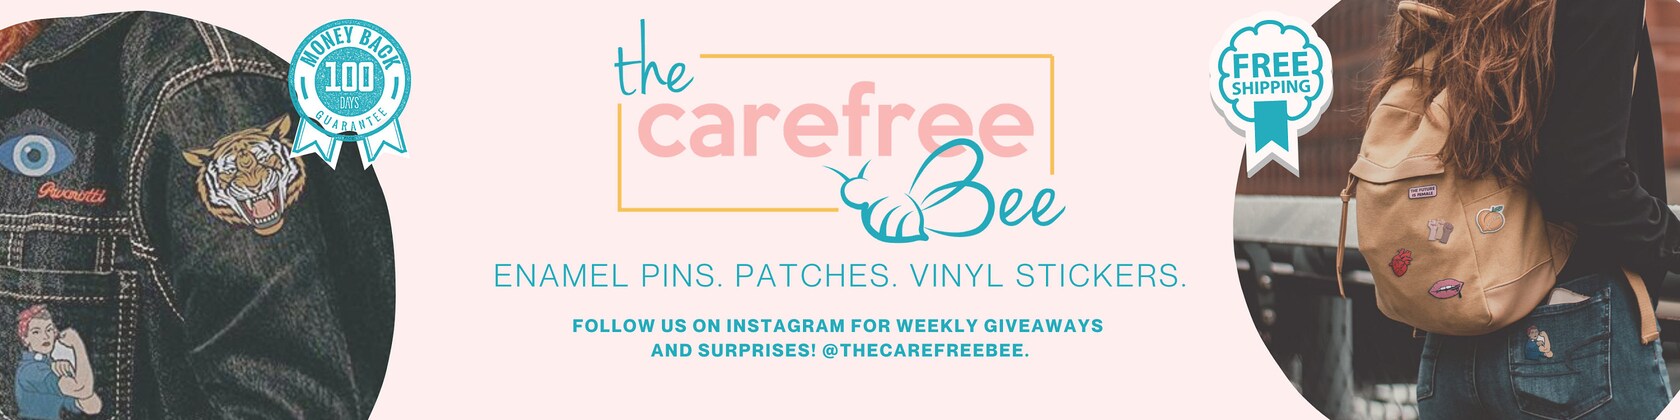 The Carefree Bee 7 Cute Pins, Kawaii Pins, Pins for Backpacks Aesthetic, Cat Pin, Cute Animal Pins, Cute Enamel Pins, Backpack Pins Aesthetic, Kawaii Pins for